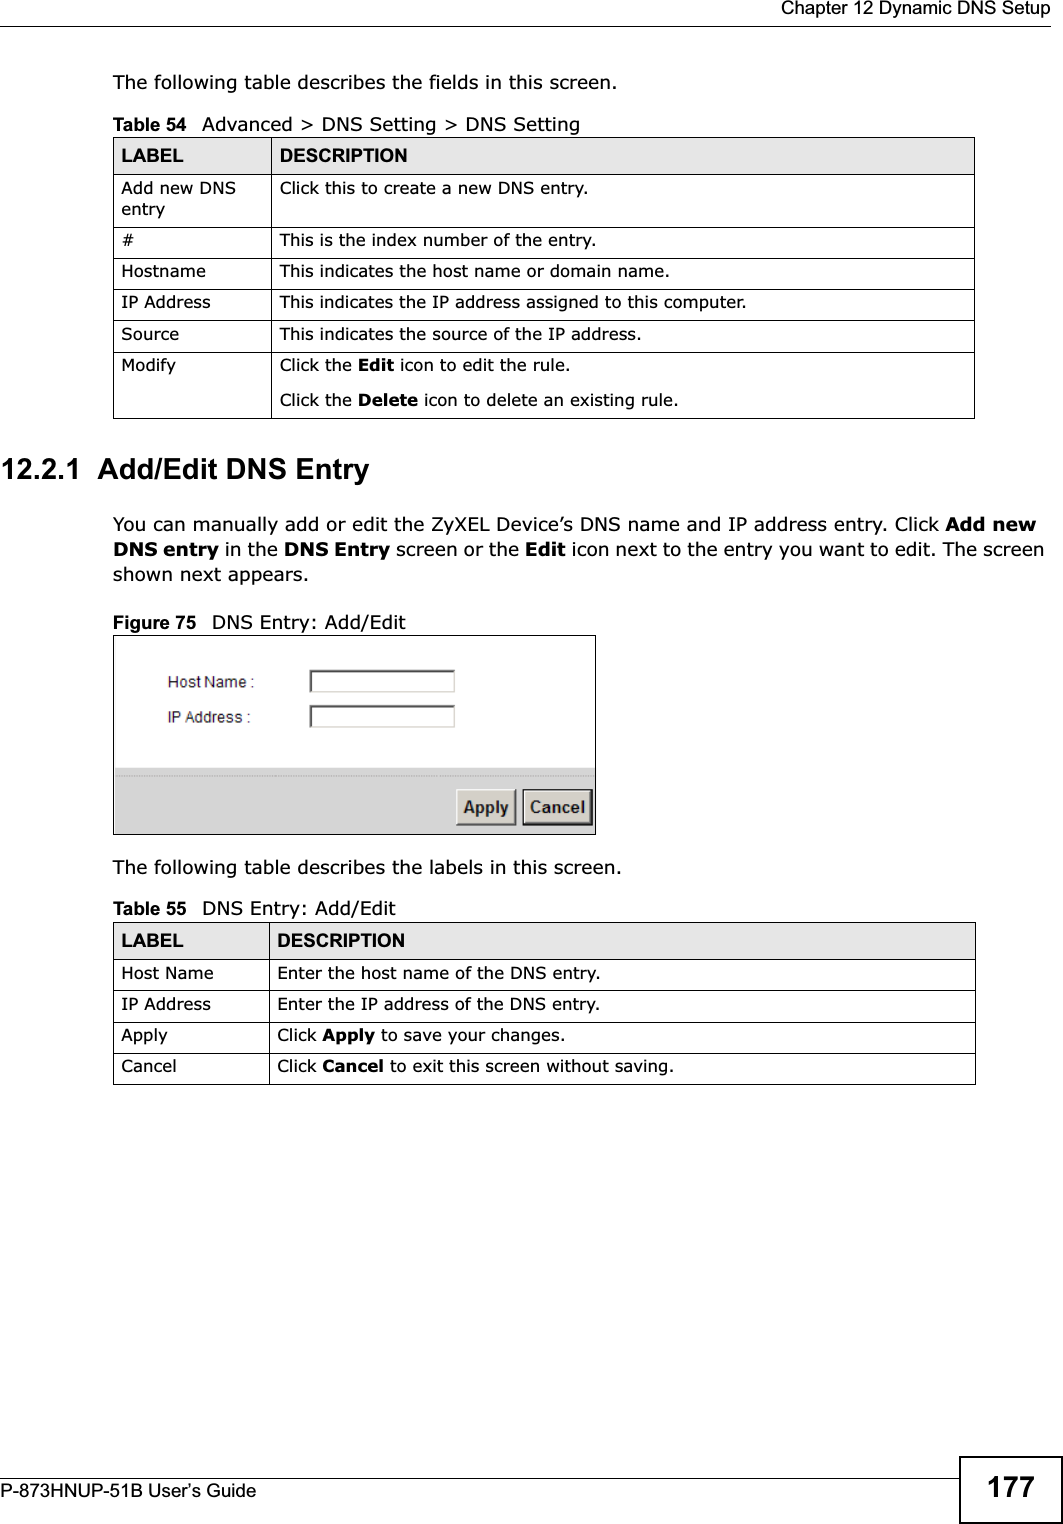  Chapter 12 Dynamic DNS SetupP-873HNUP-51B User’s Guide 177The following table describes the fields in this screen. 12.2.1  Add/Edit DNS EntryYou can manually add or edit the ZyXEL Device’s DNS name and IP address entry. Click Add new DNS entry in the DNS Entry screen or the Edit icon next to the entry you want to edit. The screen shown next appears.Figure 75   DNS Entry: Add/EditThe following table describes the labels in this screen. Table 54   Advanced &gt; DNS Setting &gt; DNS SettingLABEL DESCRIPTIONAdd new DNS entryClick this to create a new DNS entry.#This is the index number of the entry.Hostname This indicates the host name or domain name.IP Address This indicates the IP address assigned to this computer.Source This indicates the source of the IP address.Modify Click the Edit icon to edit the rule.Click the Delete icon to delete an existing rule.Table 55   DNS Entry: Add/EditLABEL DESCRIPTIONHost Name Enter the host name of the DNS entry.IP Address Enter the IP address of the DNS entry.Apply Click Apply to save your changes.Cancel Click Cancel to exit this screen without saving.